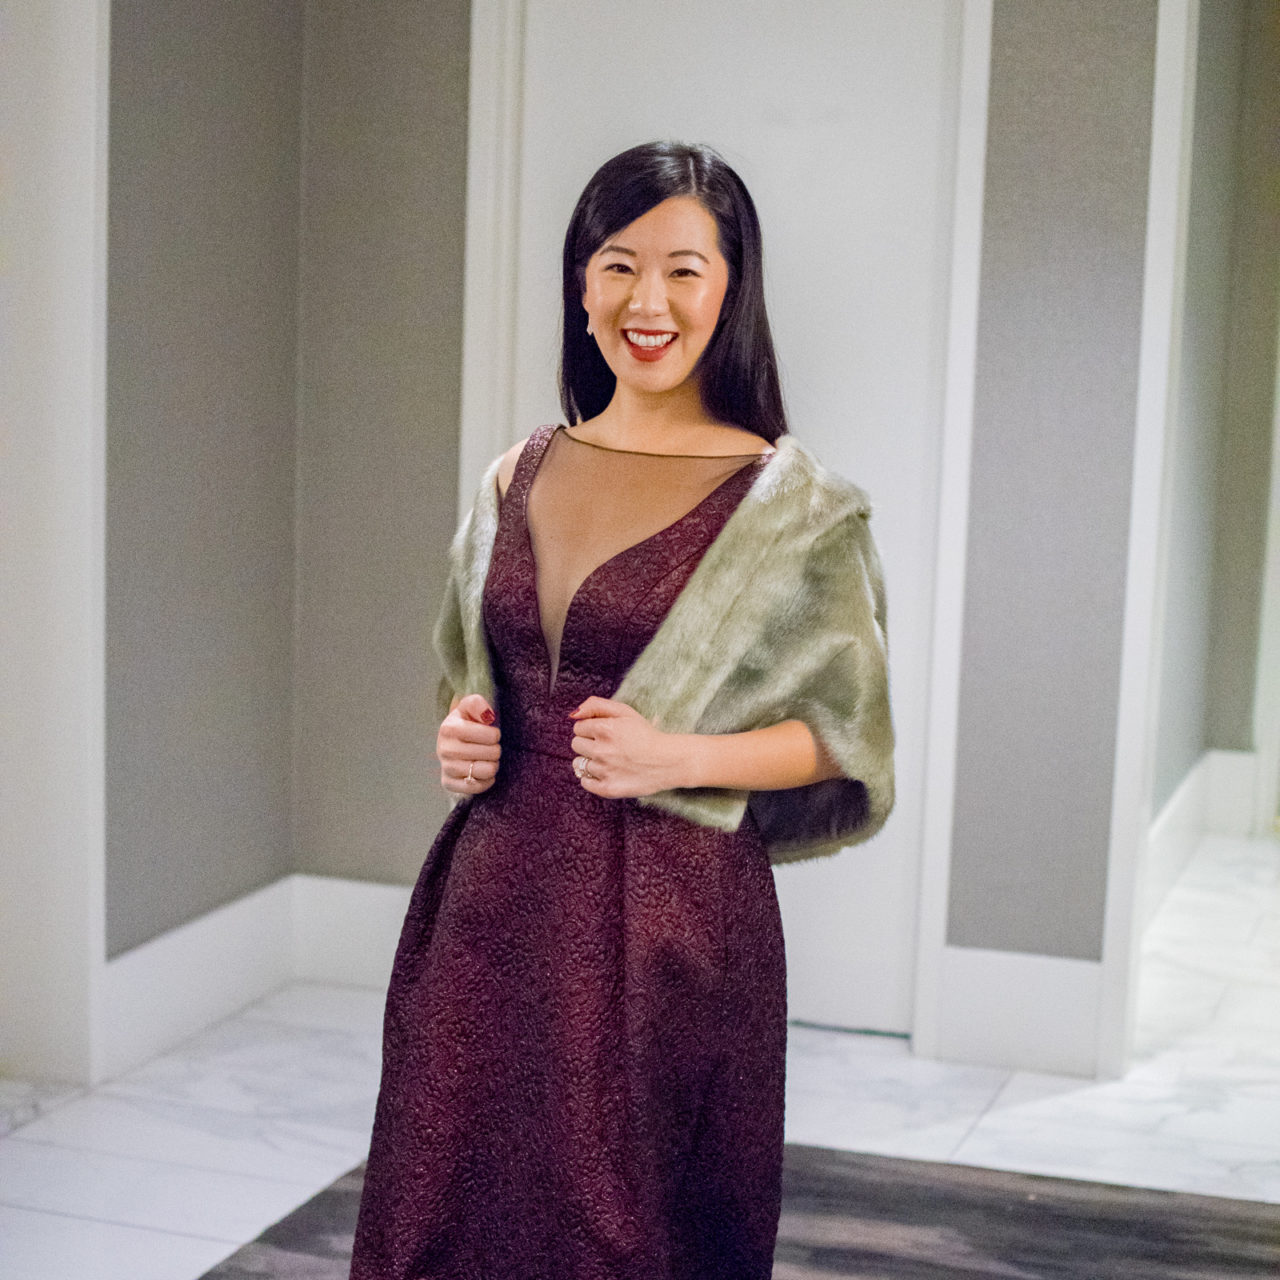 Winter Wedding Guest Outfit Inspiration (Or Fancy Holiday Party!)